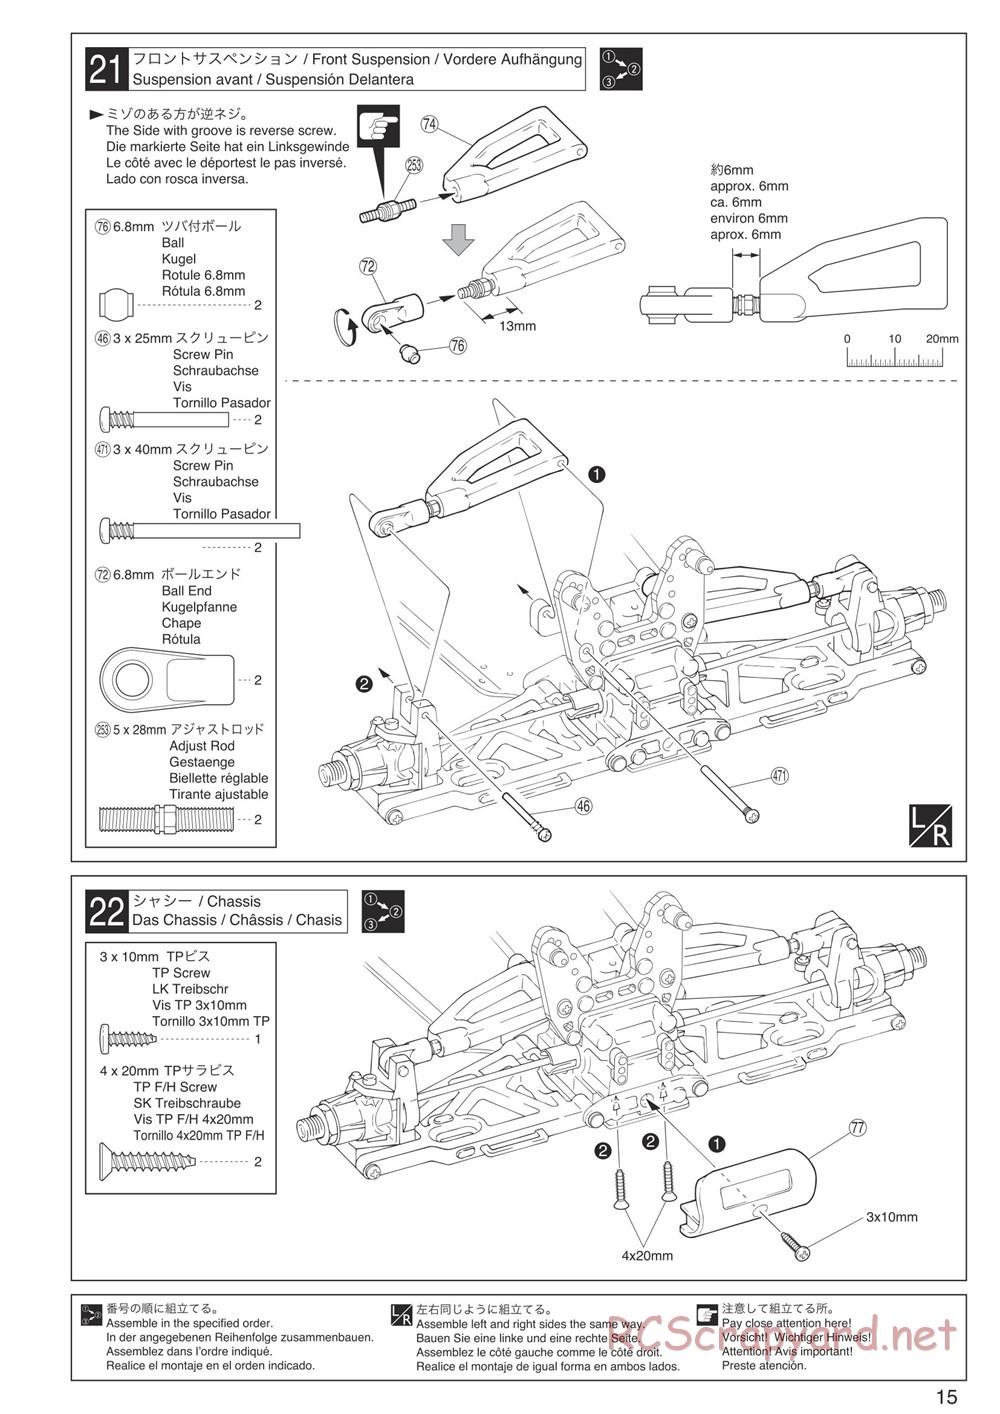 Kyosho - Inferno Neo 3.0 - Manual - Page 15